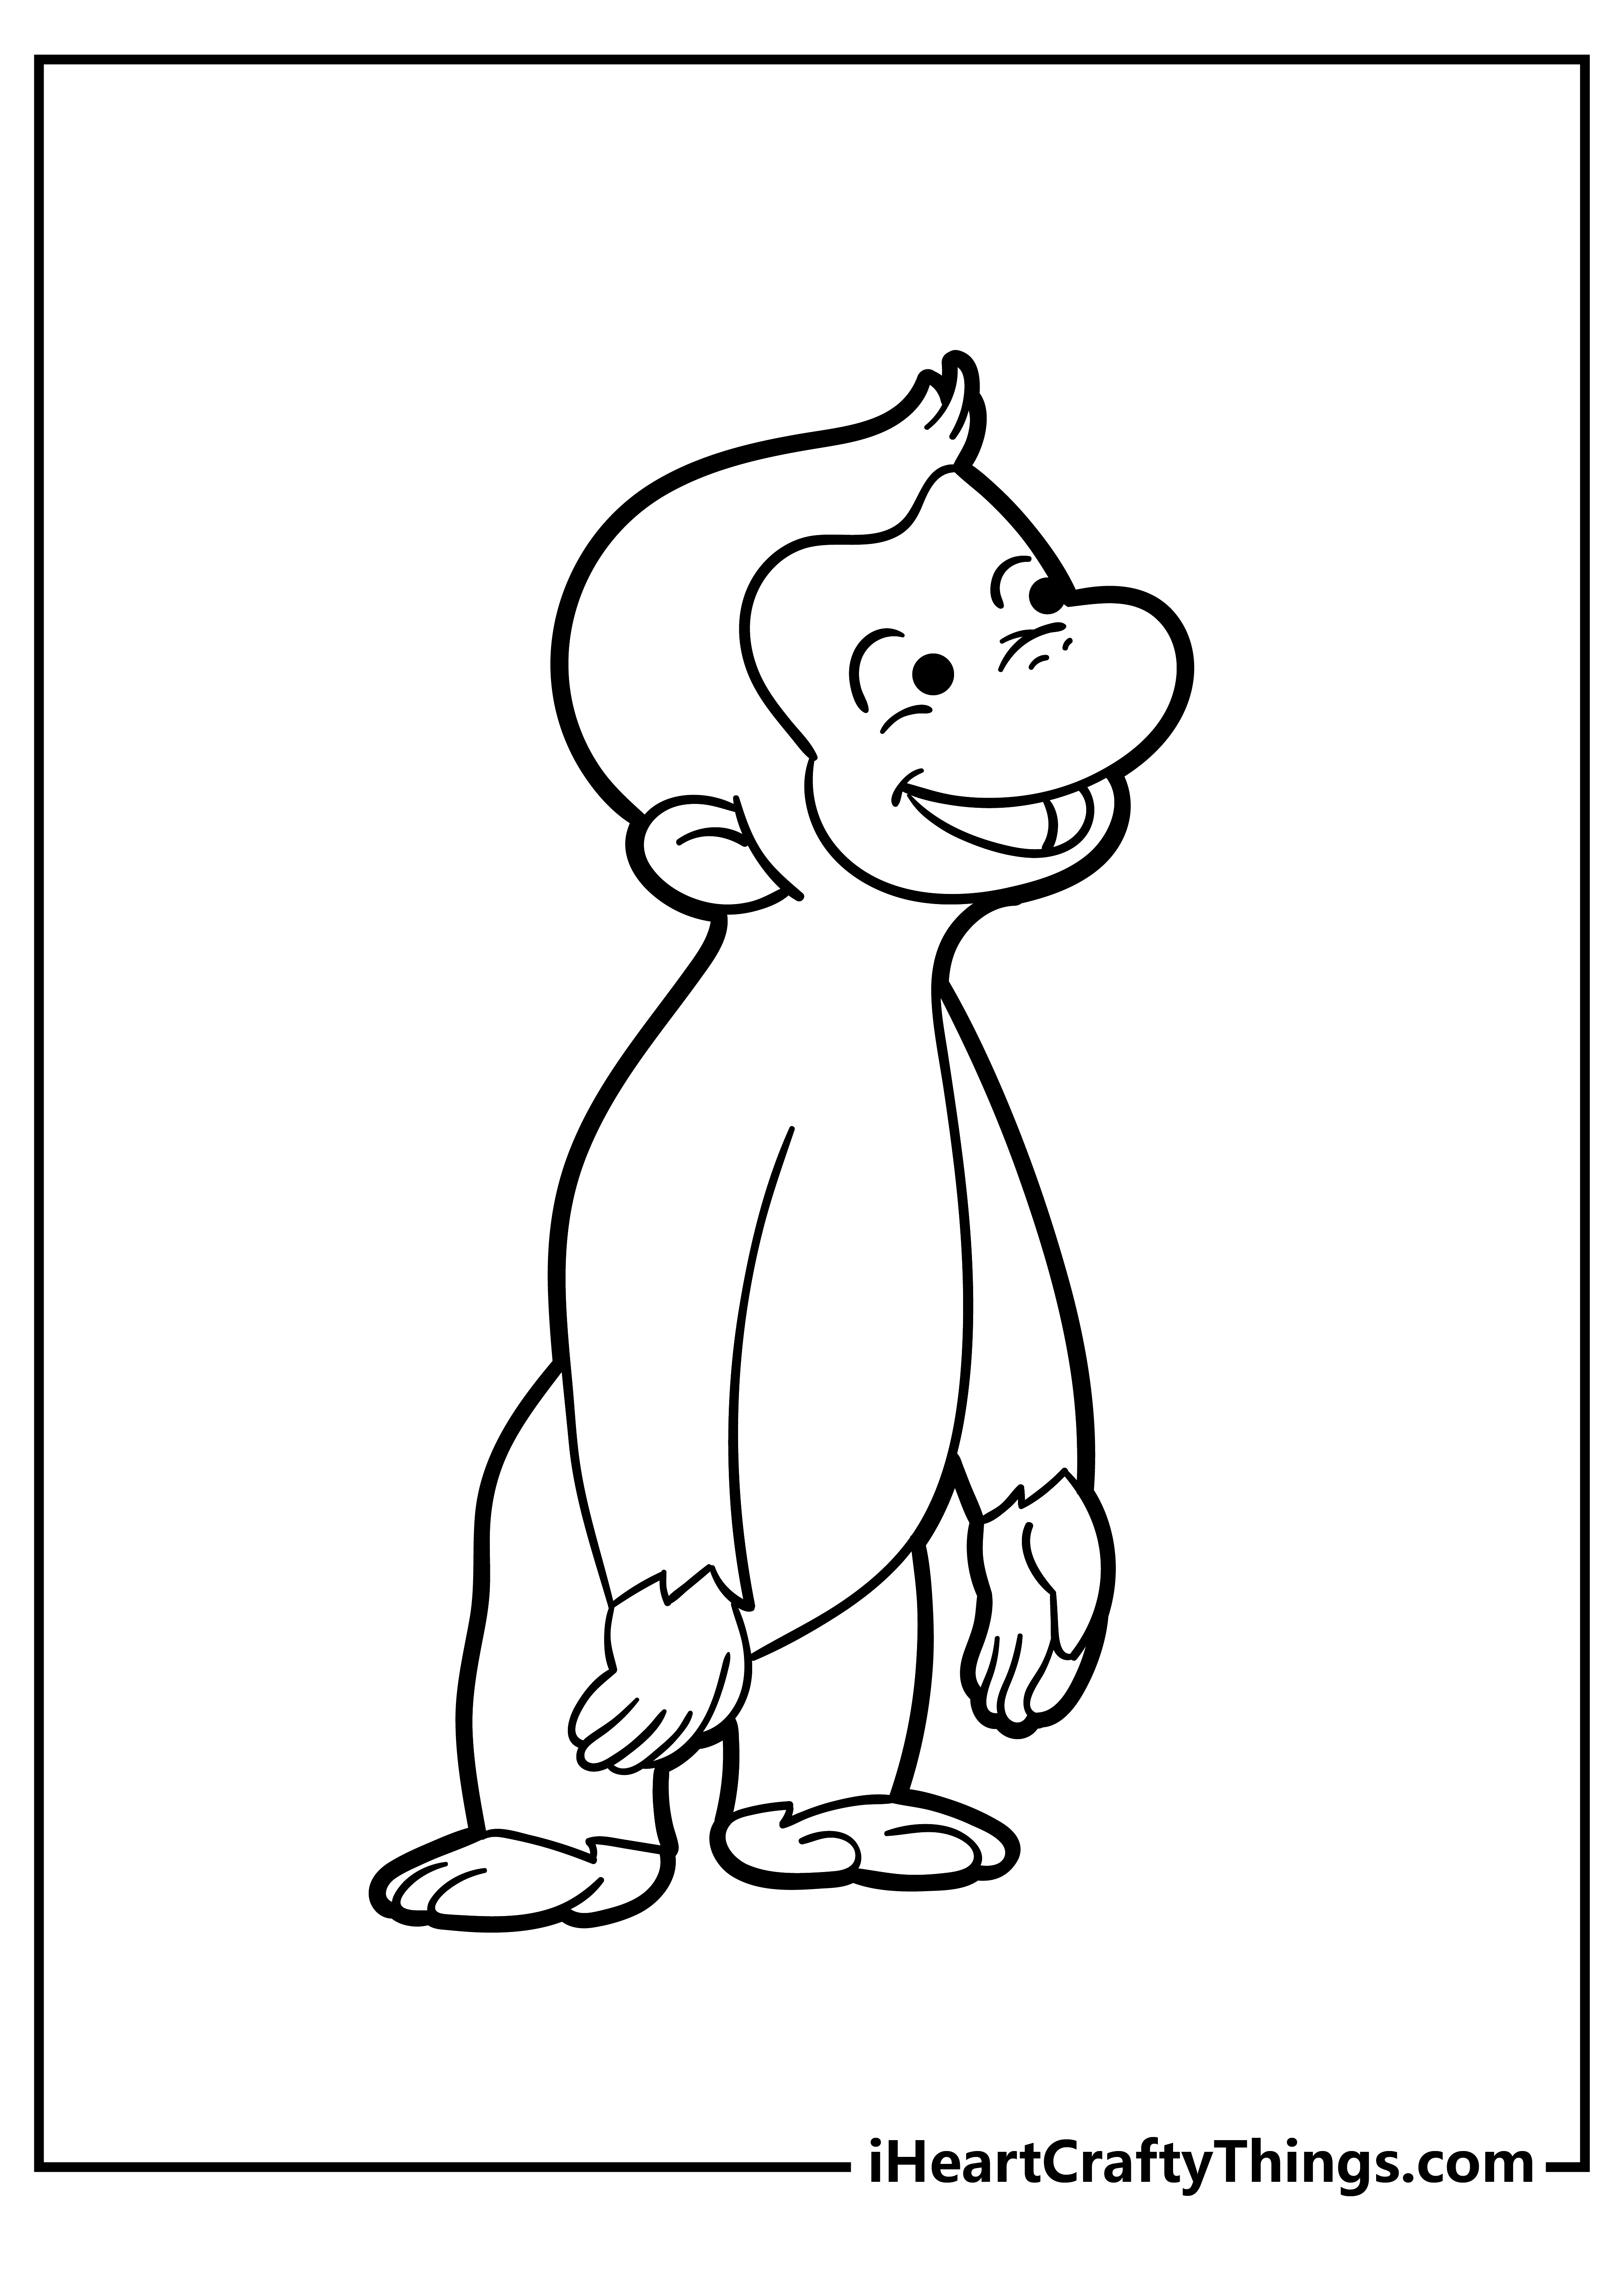 Curious George Coloring Pages for adults free printable